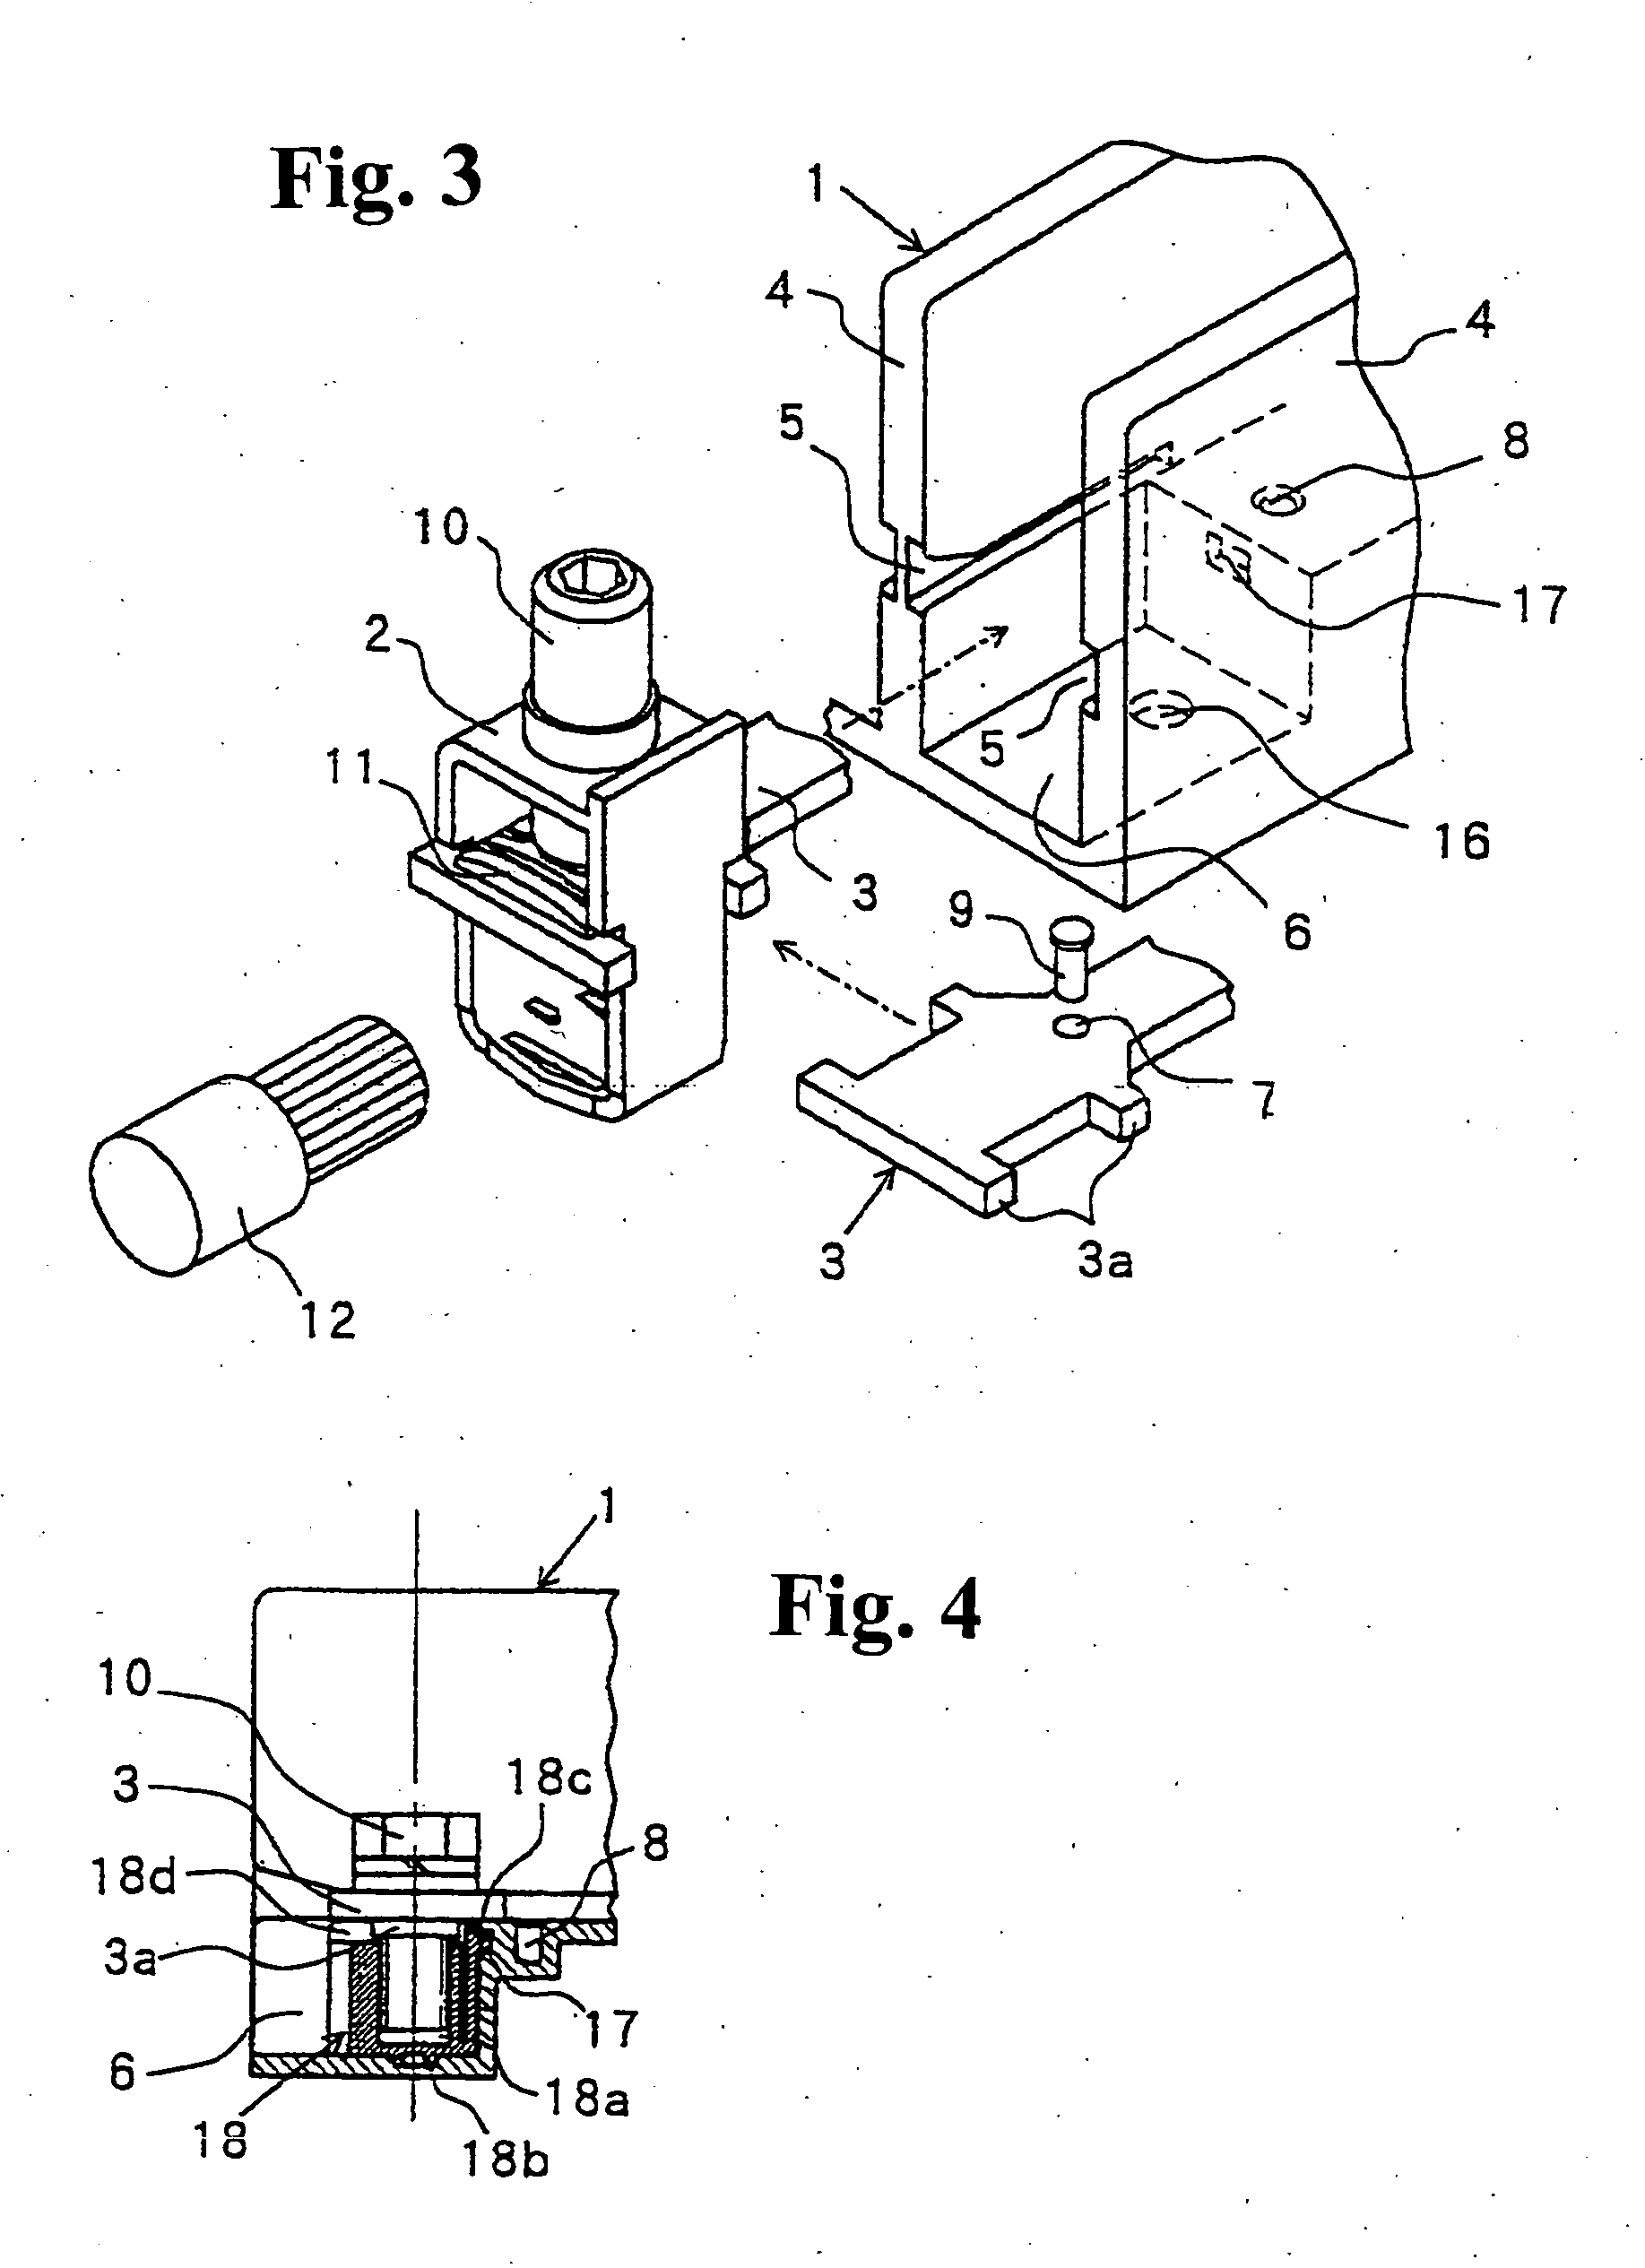 Terminal device of electrical apparatus